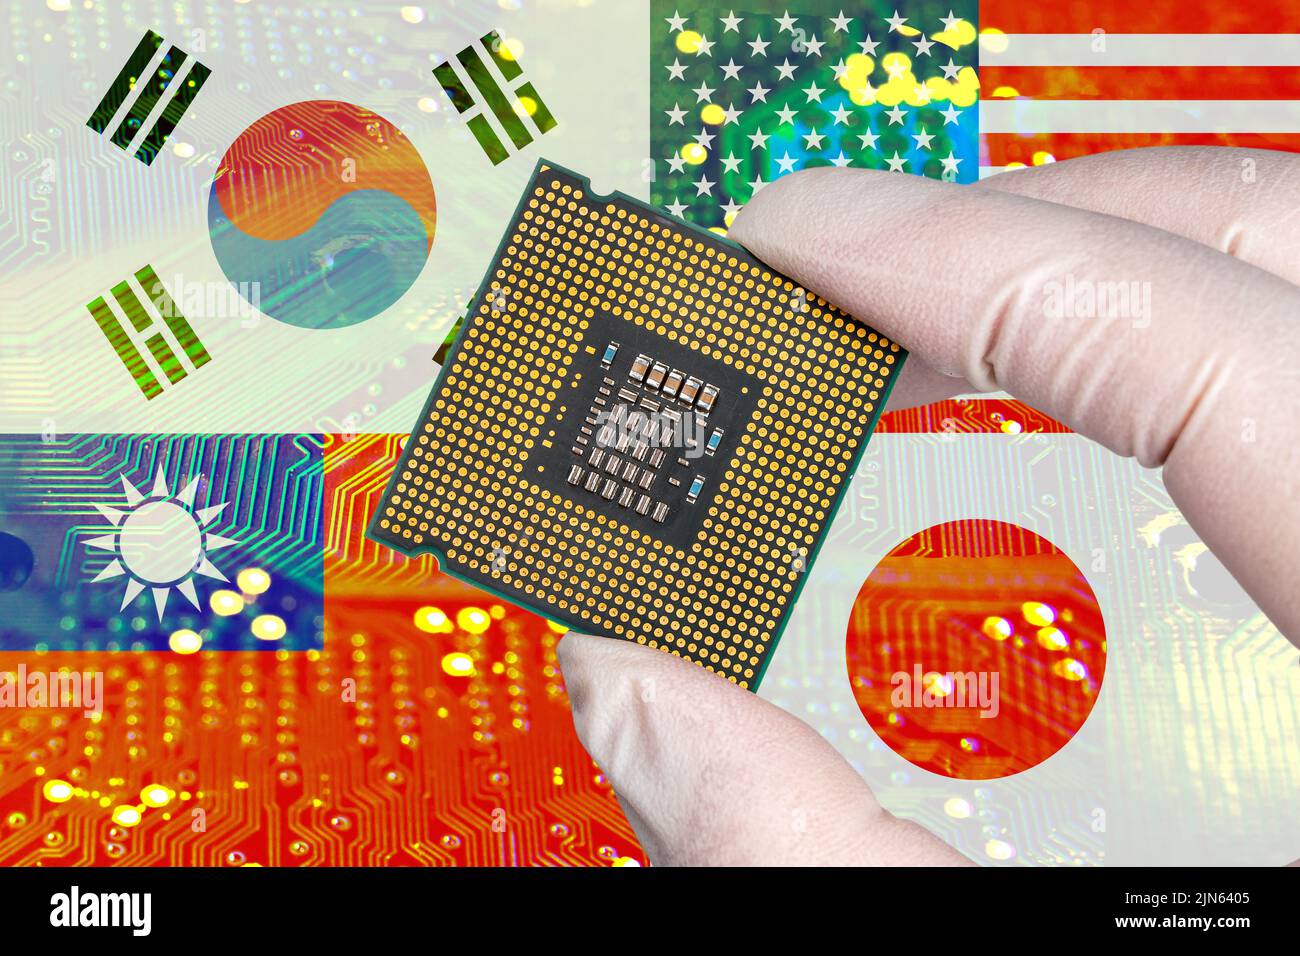 South Korea, USA, Taiwan and Japan flags and semiconductor chips. Chip4 alliance concept. Stock Photo